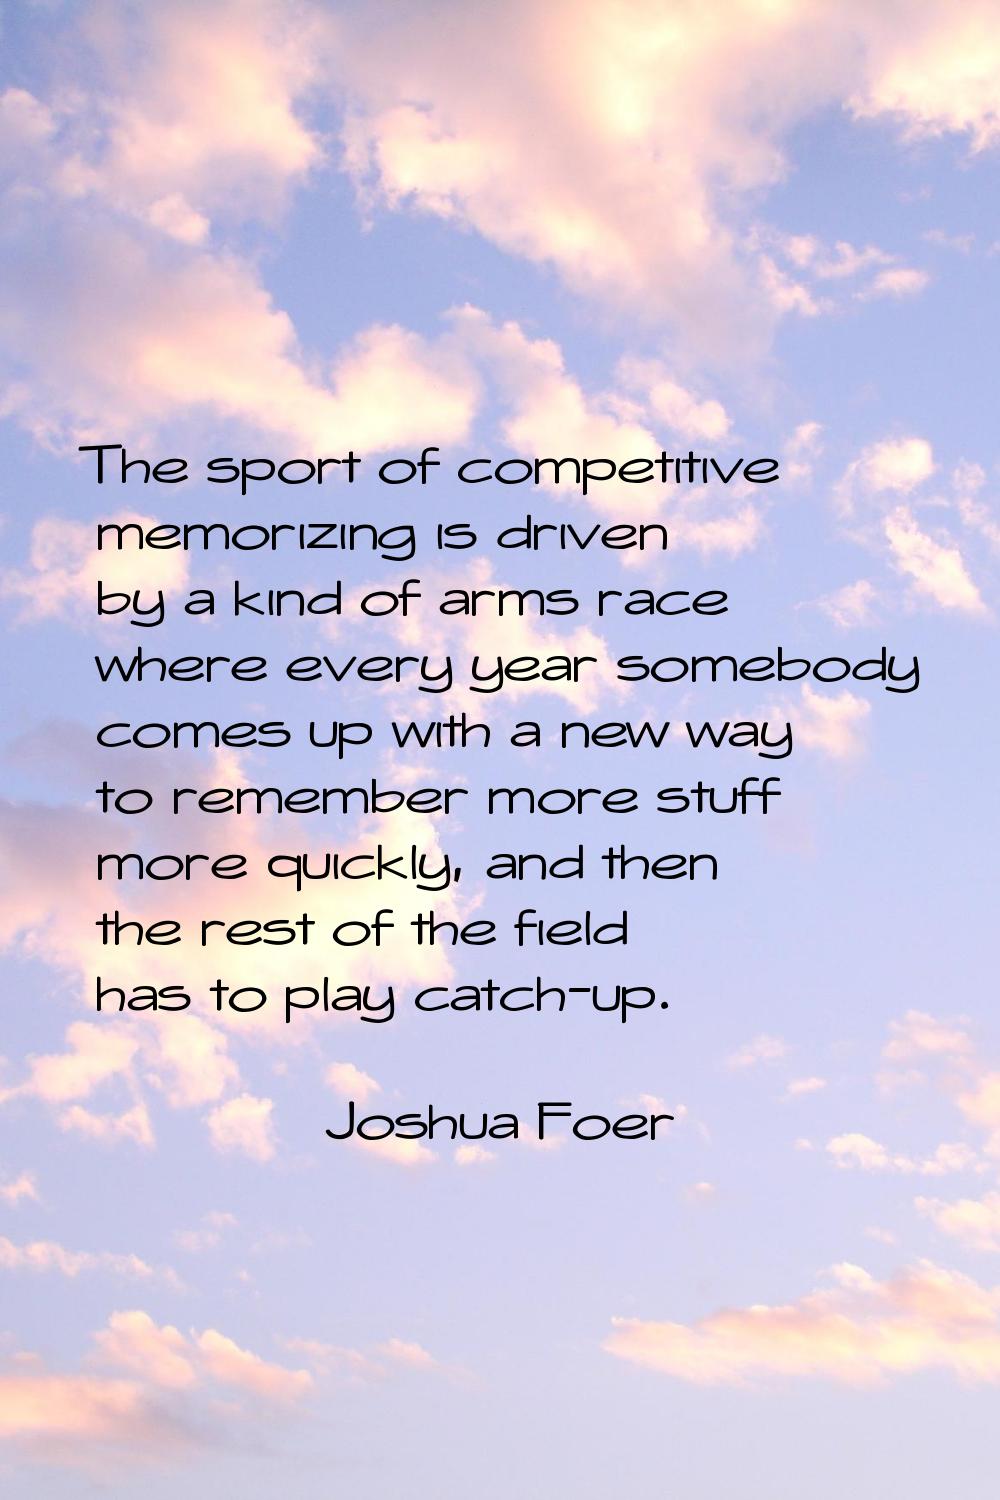 The sport of competitive memorizing is driven by a kind of arms race where every year somebody come